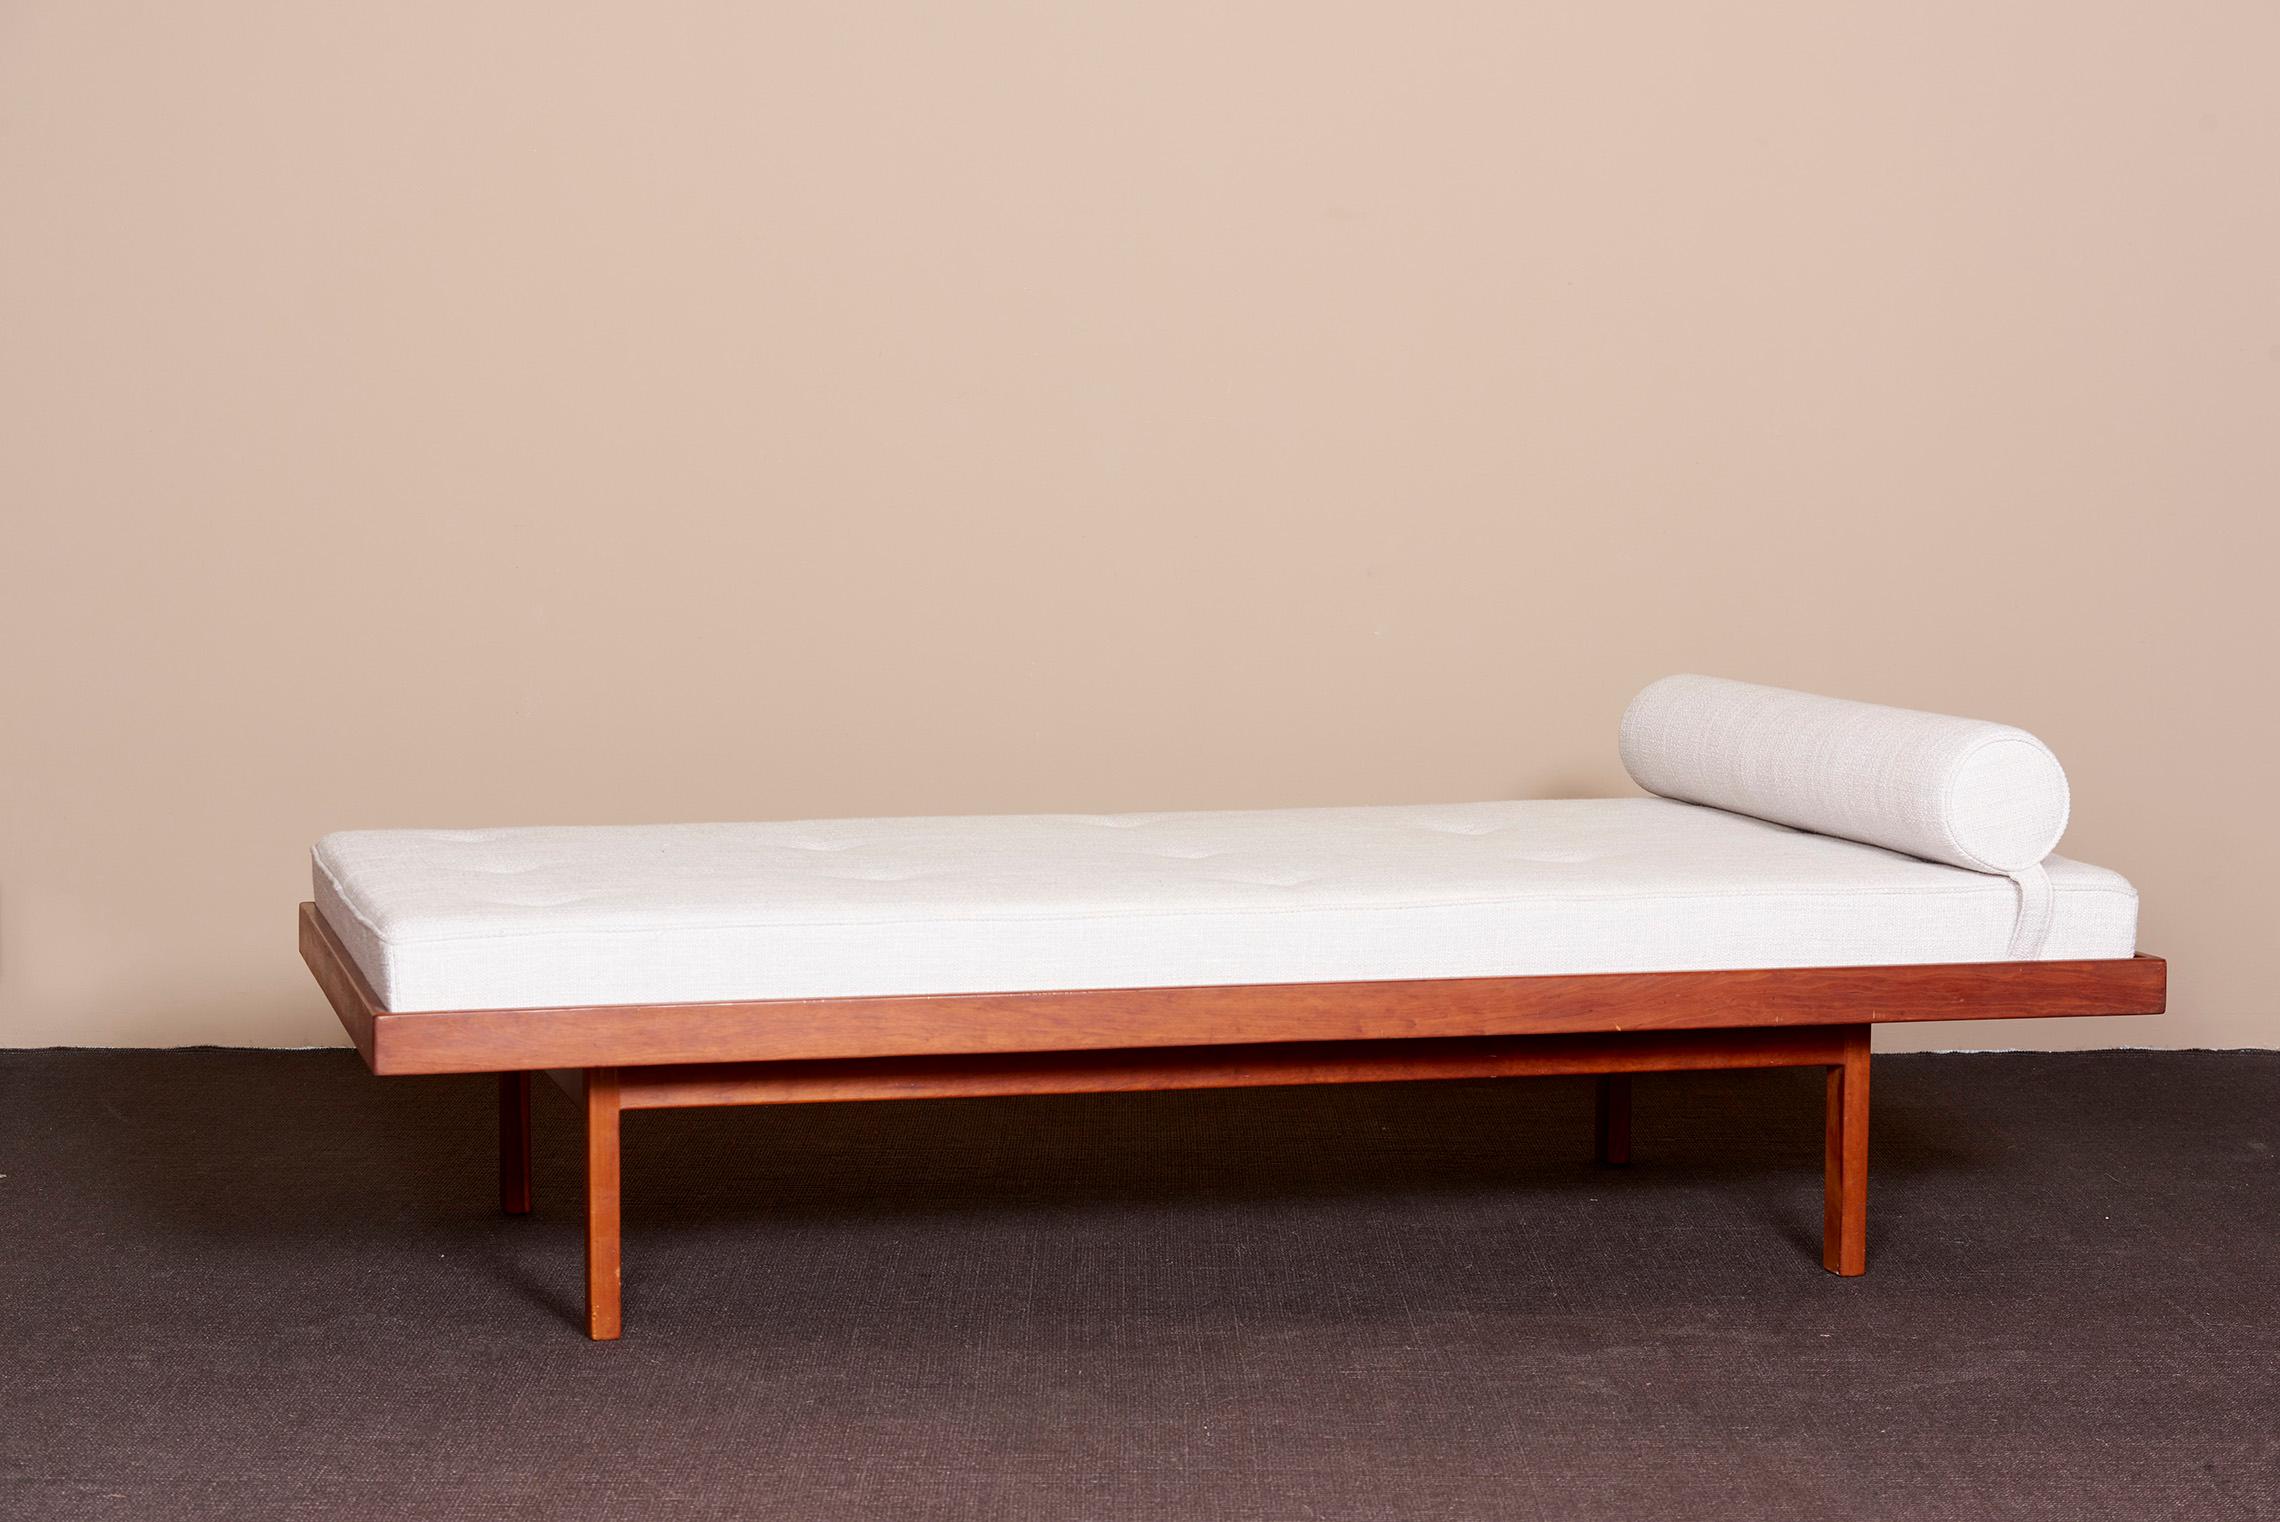 1 of 2 American Studio Walnut Frame Daybeds in Mark Alexander Fabric, US 1960s For Sale 2